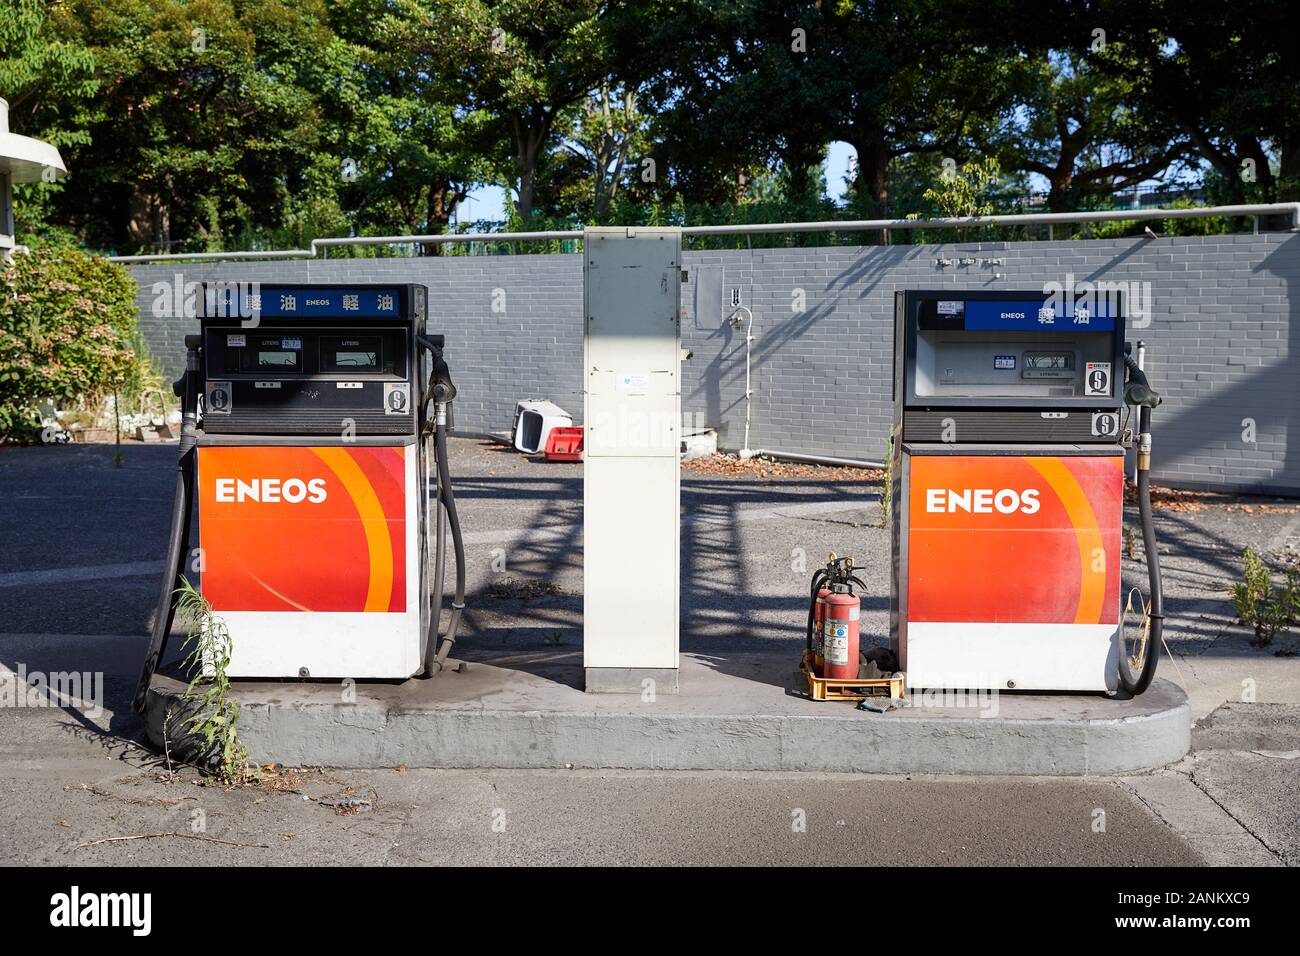 Fuel dispensers at an old Eneos filling station, Japan Stock Photo